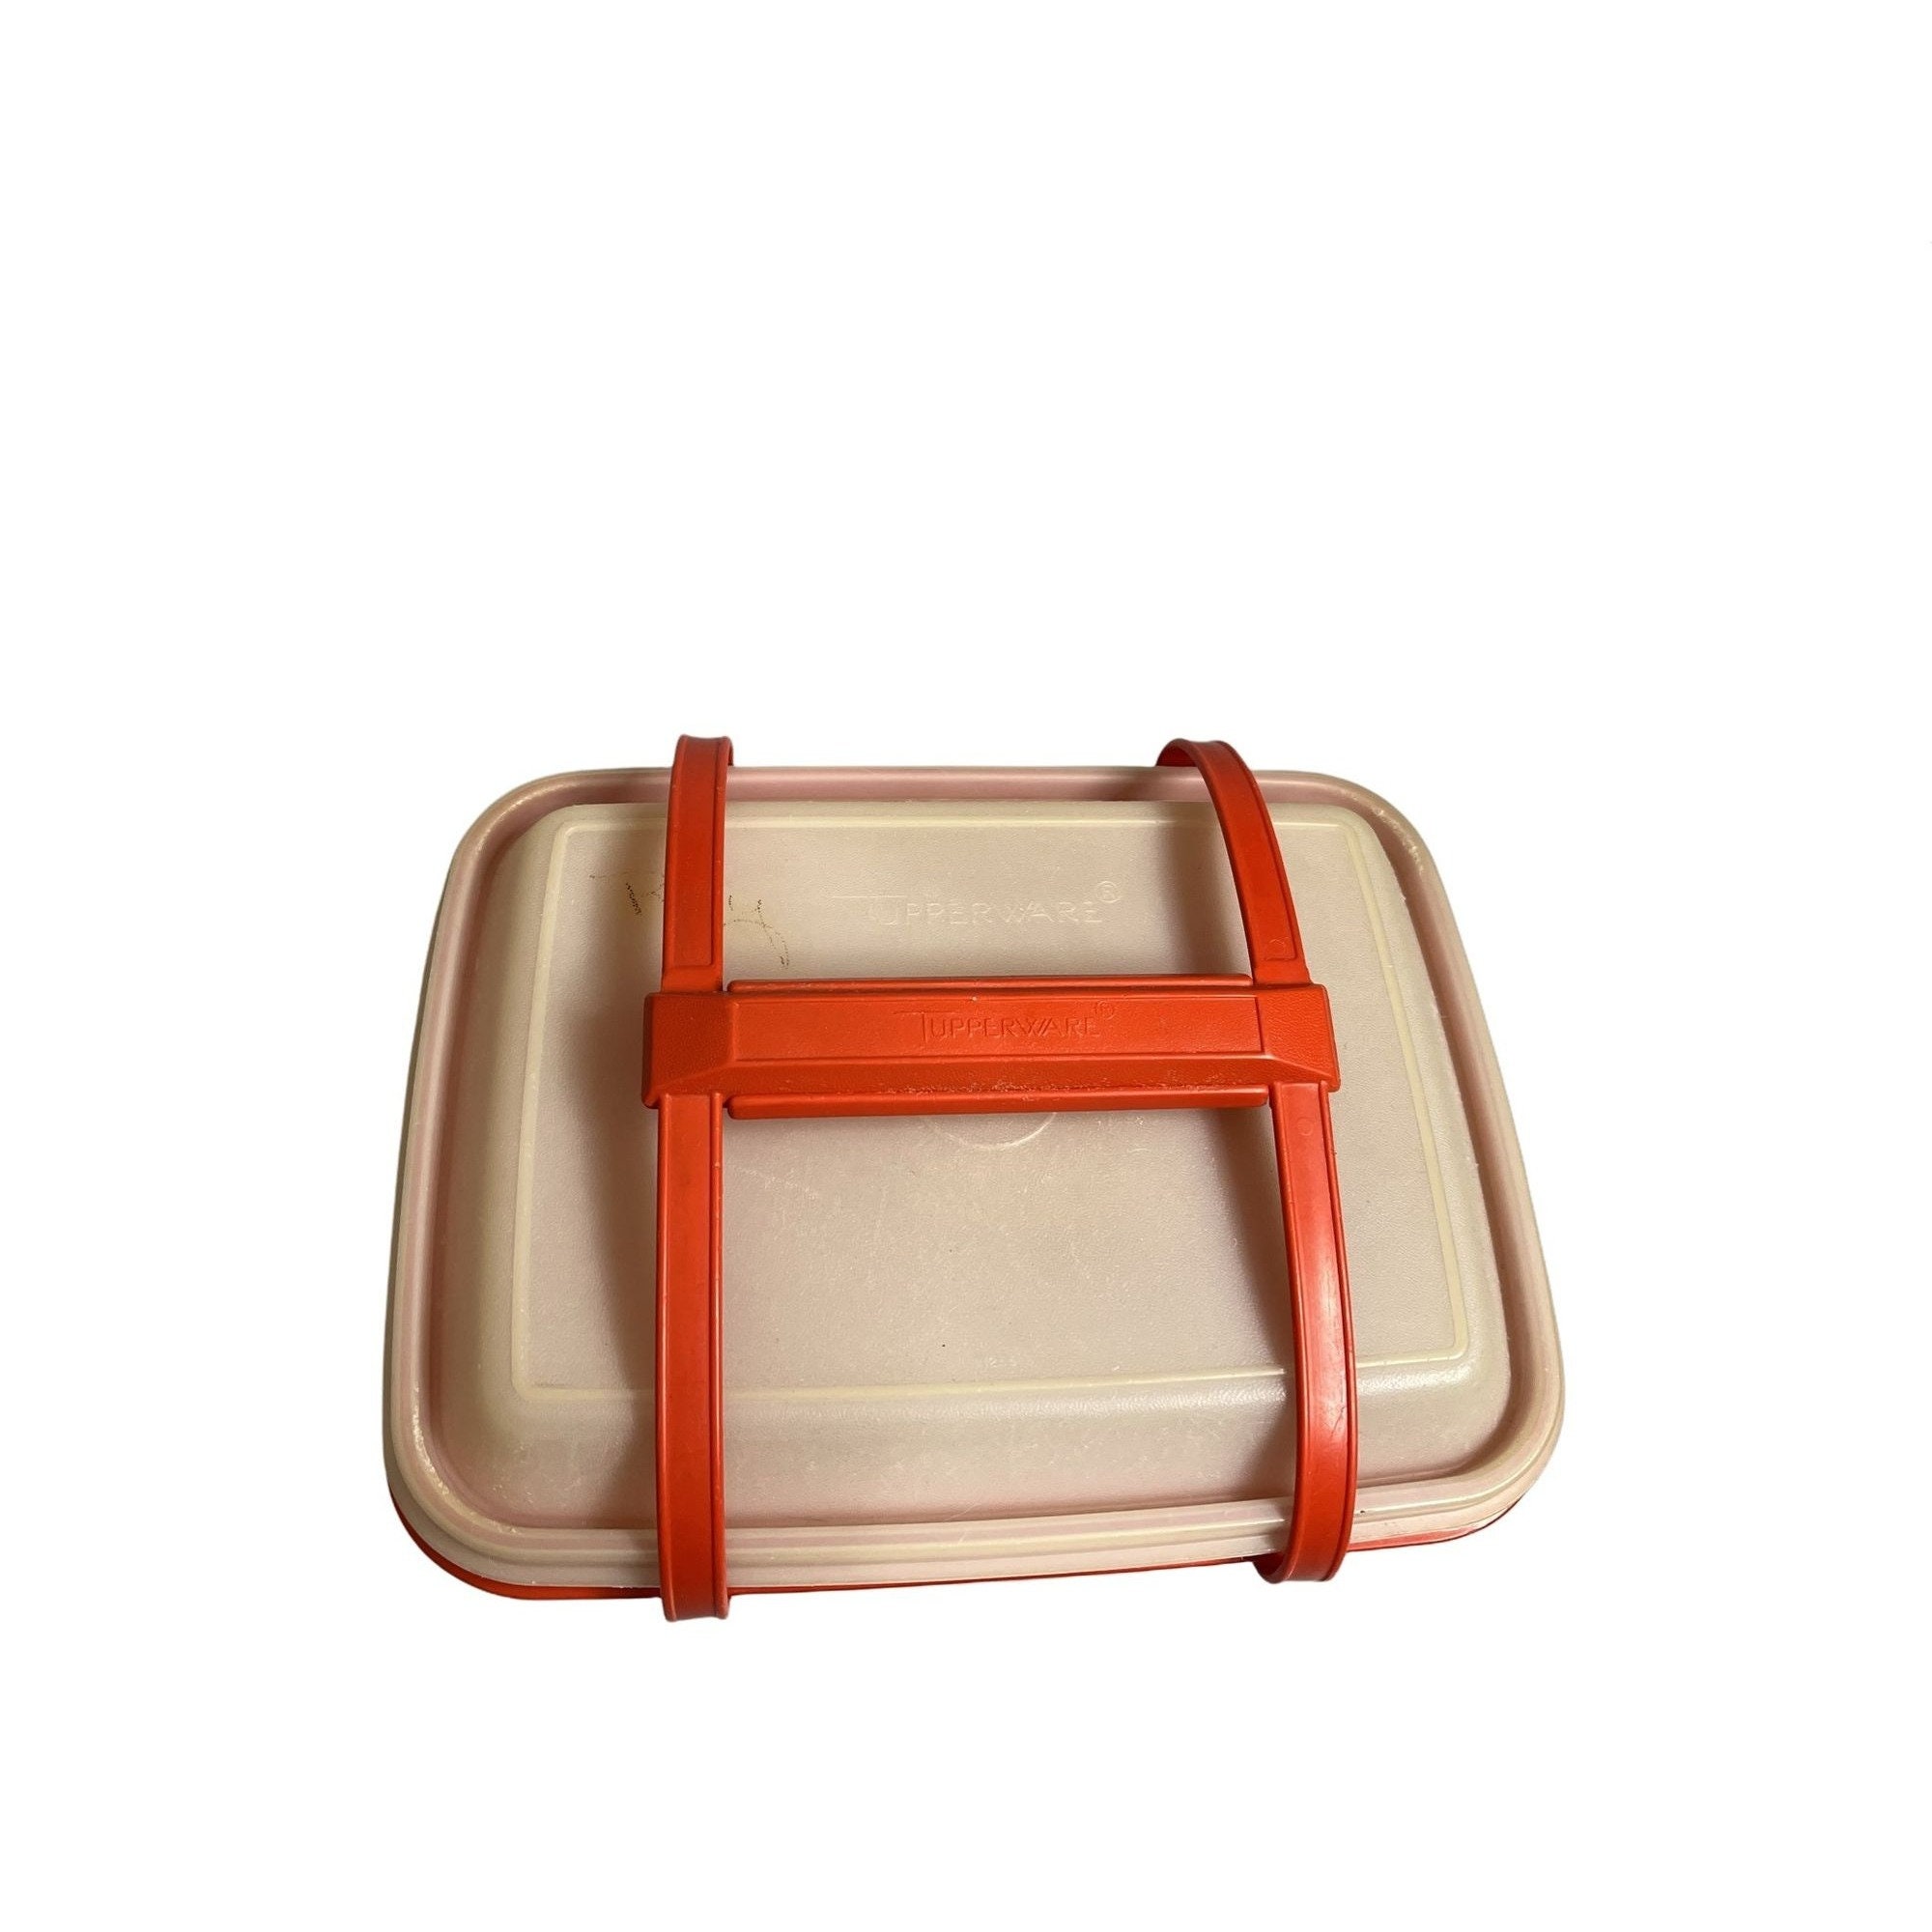 Tupperware Rocker Lunch Box With Insulated Bag - Best Lunch to Flaunt Style